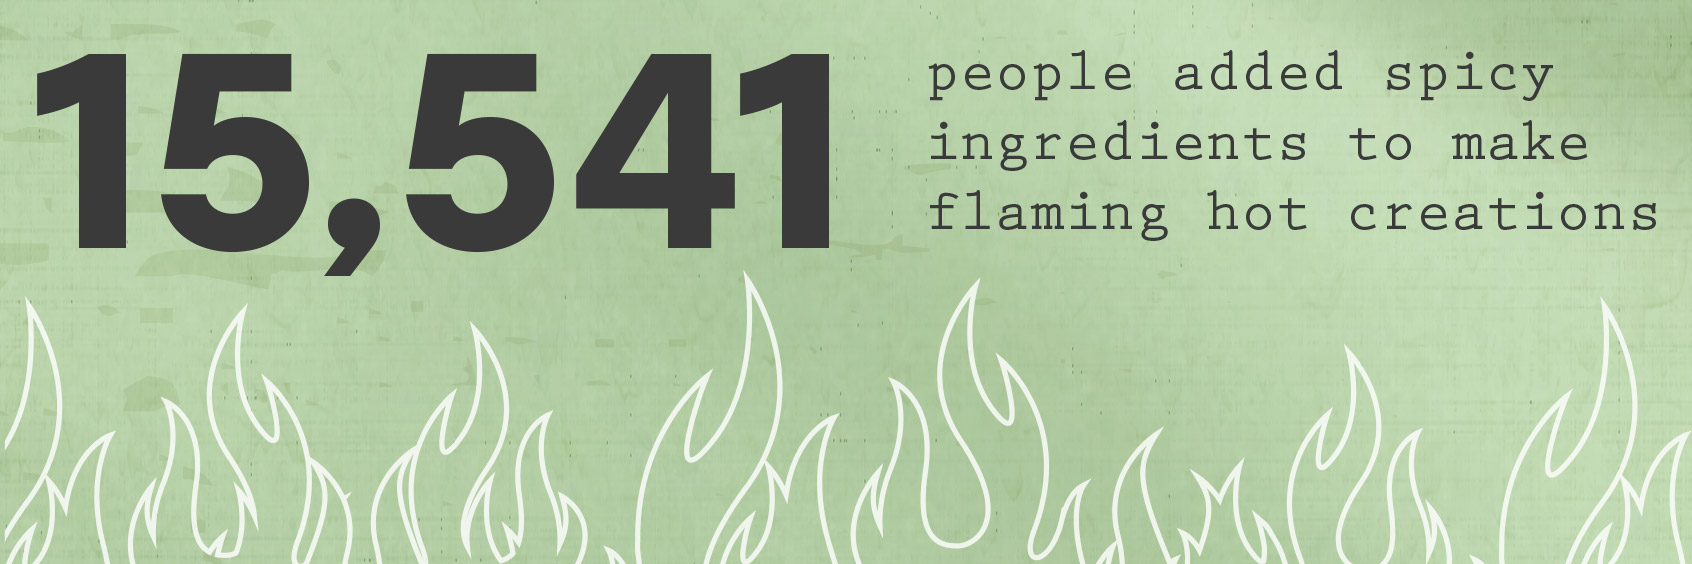 15,541 people added spicy ingredients to make flaming hot creations